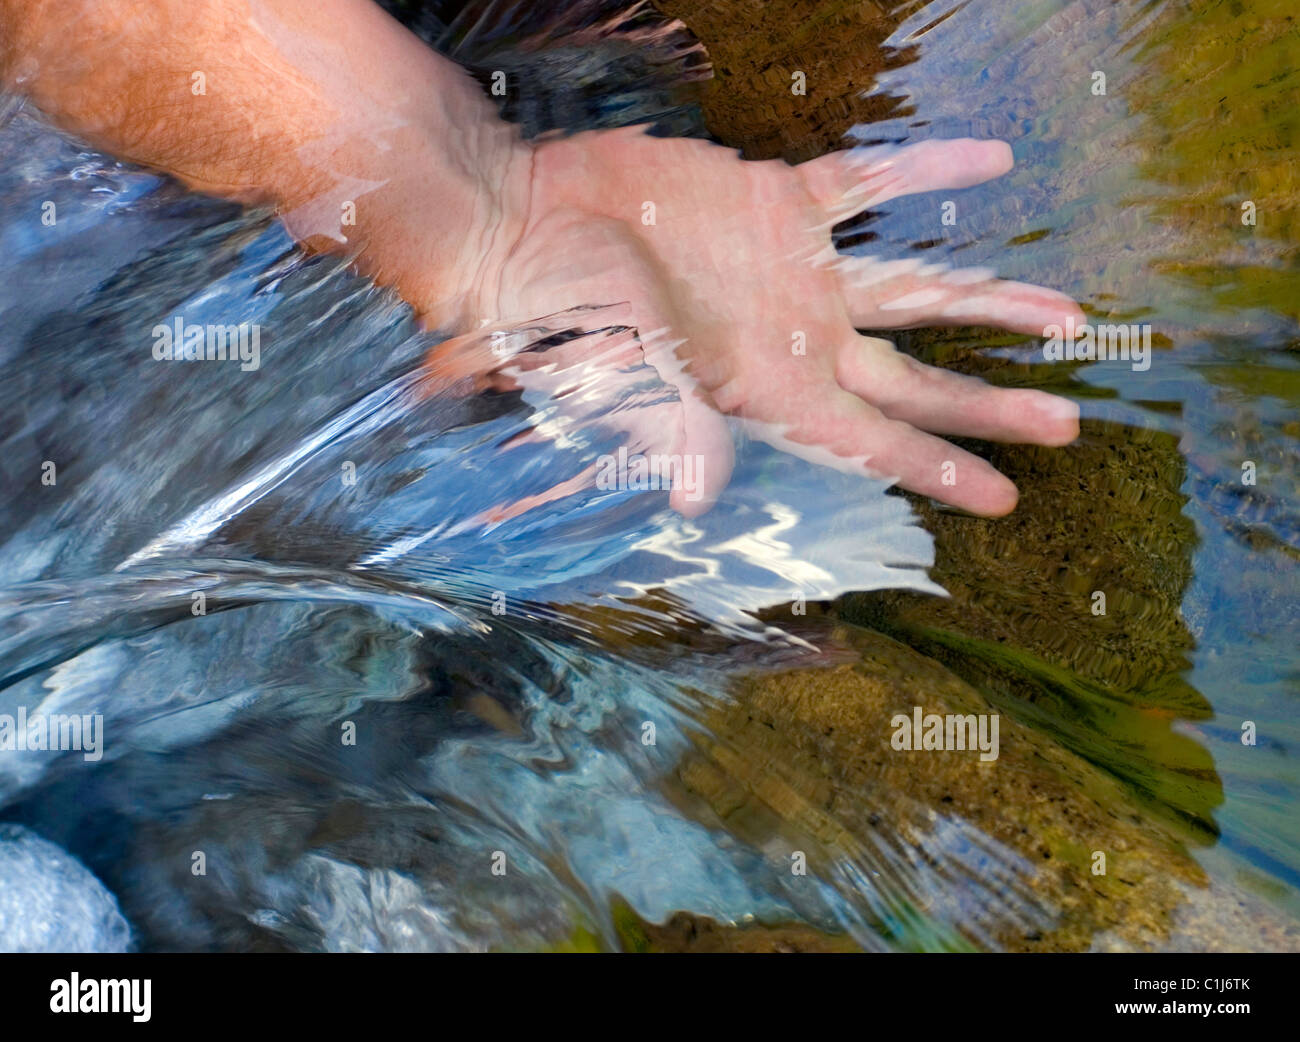 A man's hand in running stream water showing it's flow and clarity Stock Photo